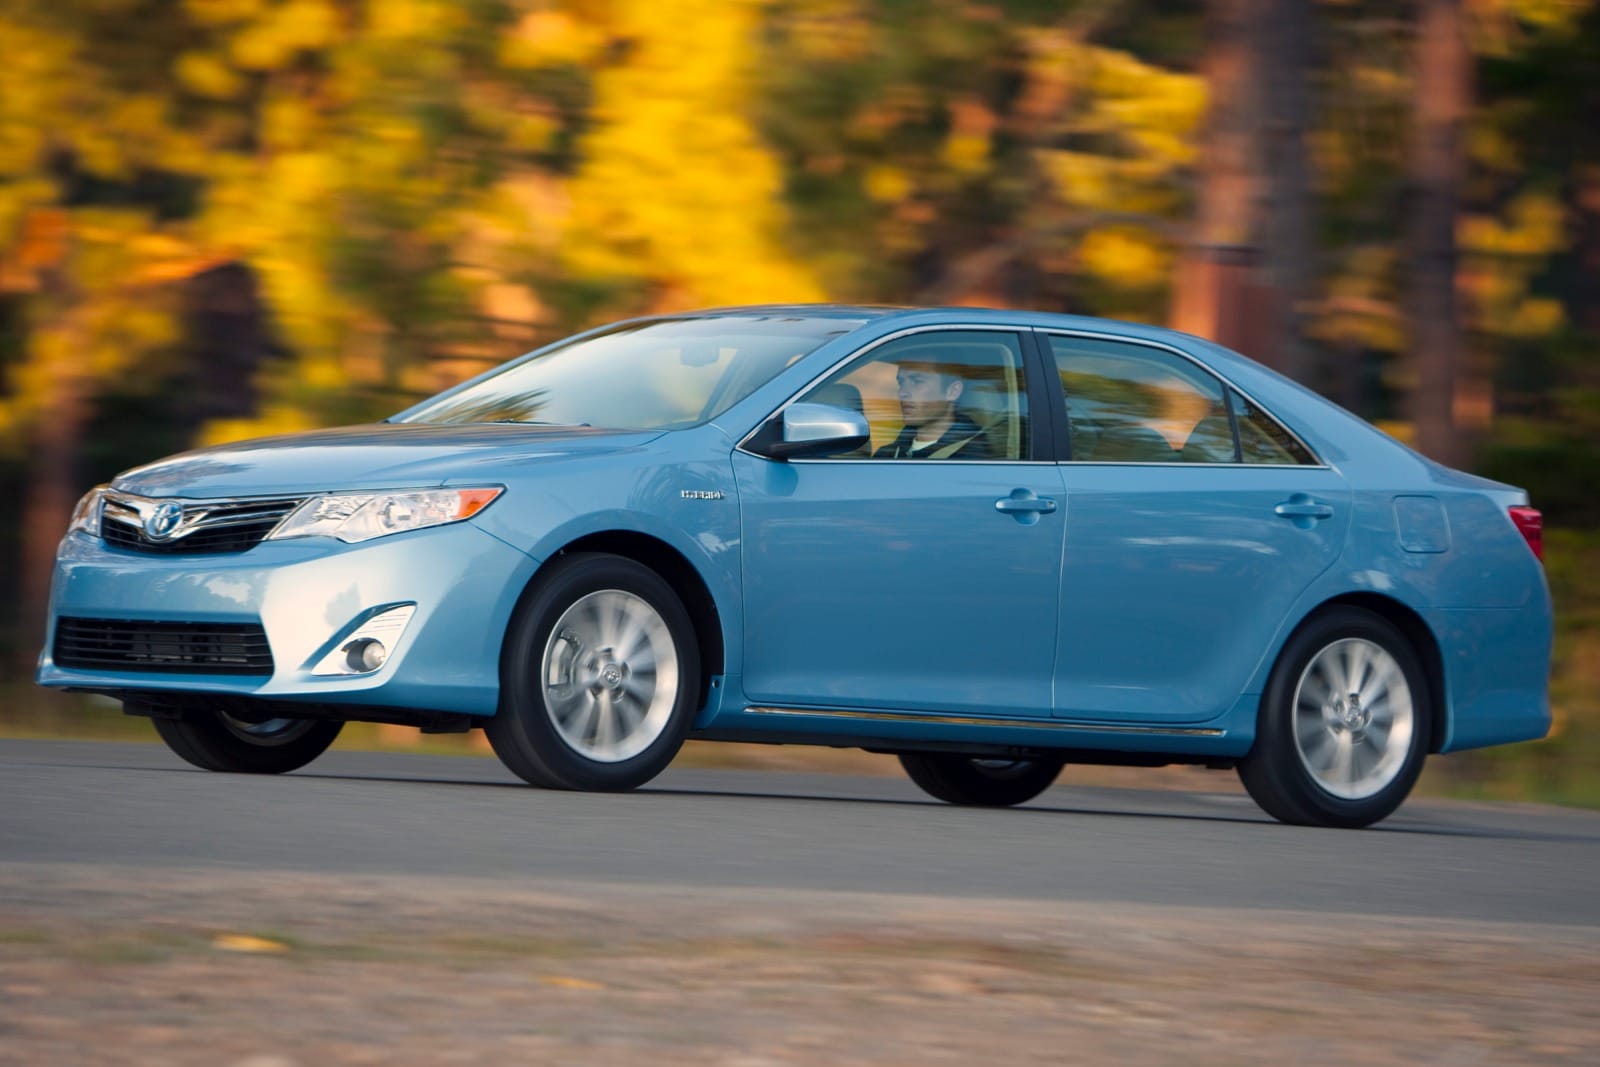 2014 Toyota Camry Hybrid Review & Ratings | Edmunds